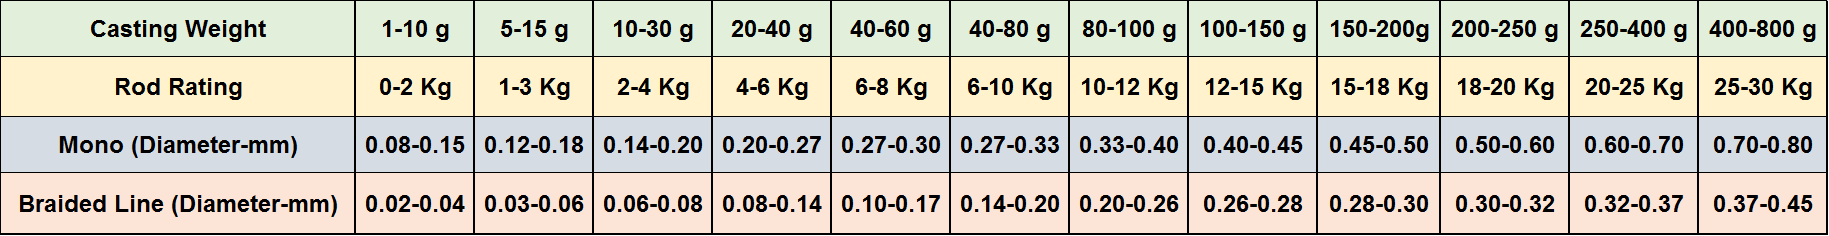 Casting weights vs. Rod rating - Adore Tackle